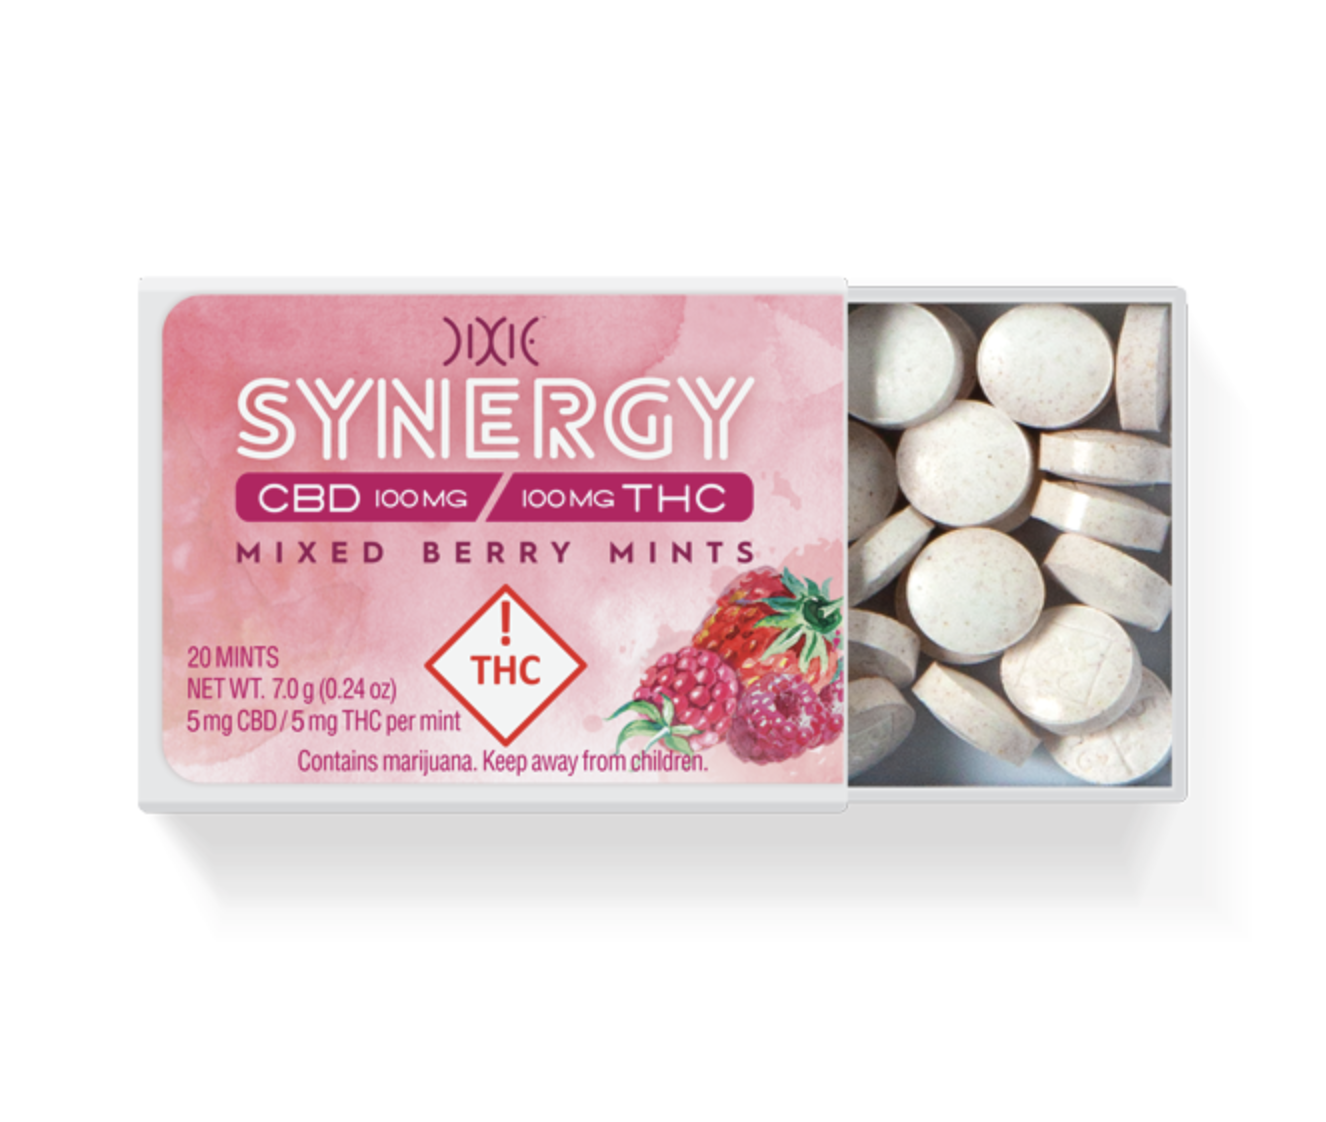 Dixie Brand's Synergy 1:1 Mixed Berry Mints